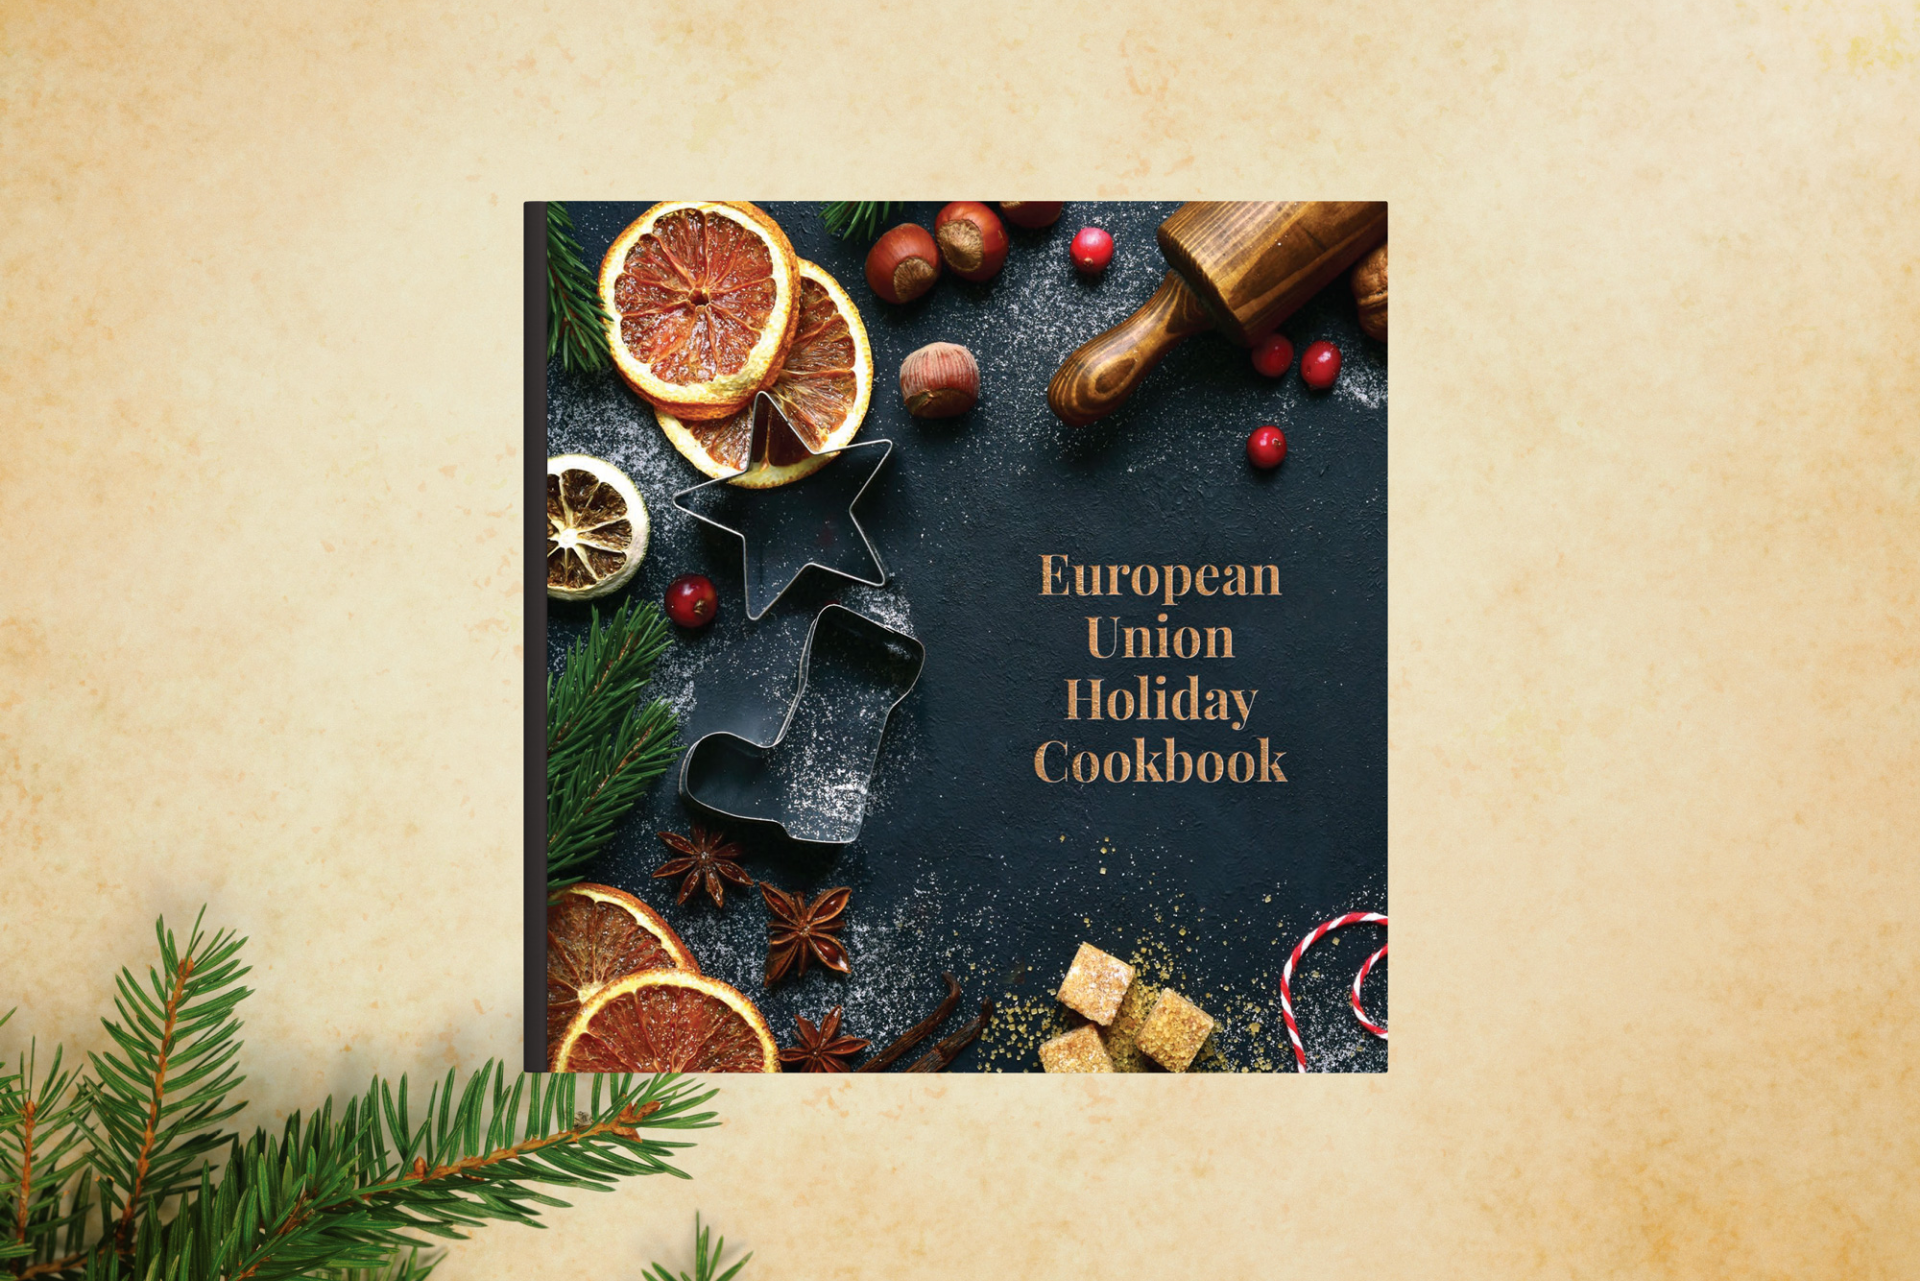 Festive holiday baking concept with a Christmas cookie cutter, dried oranges, cinnamon, and cranberries on a dark background, evoking a warm and cozy atmosphere for an EU Holiday Recipes cookbook cover.